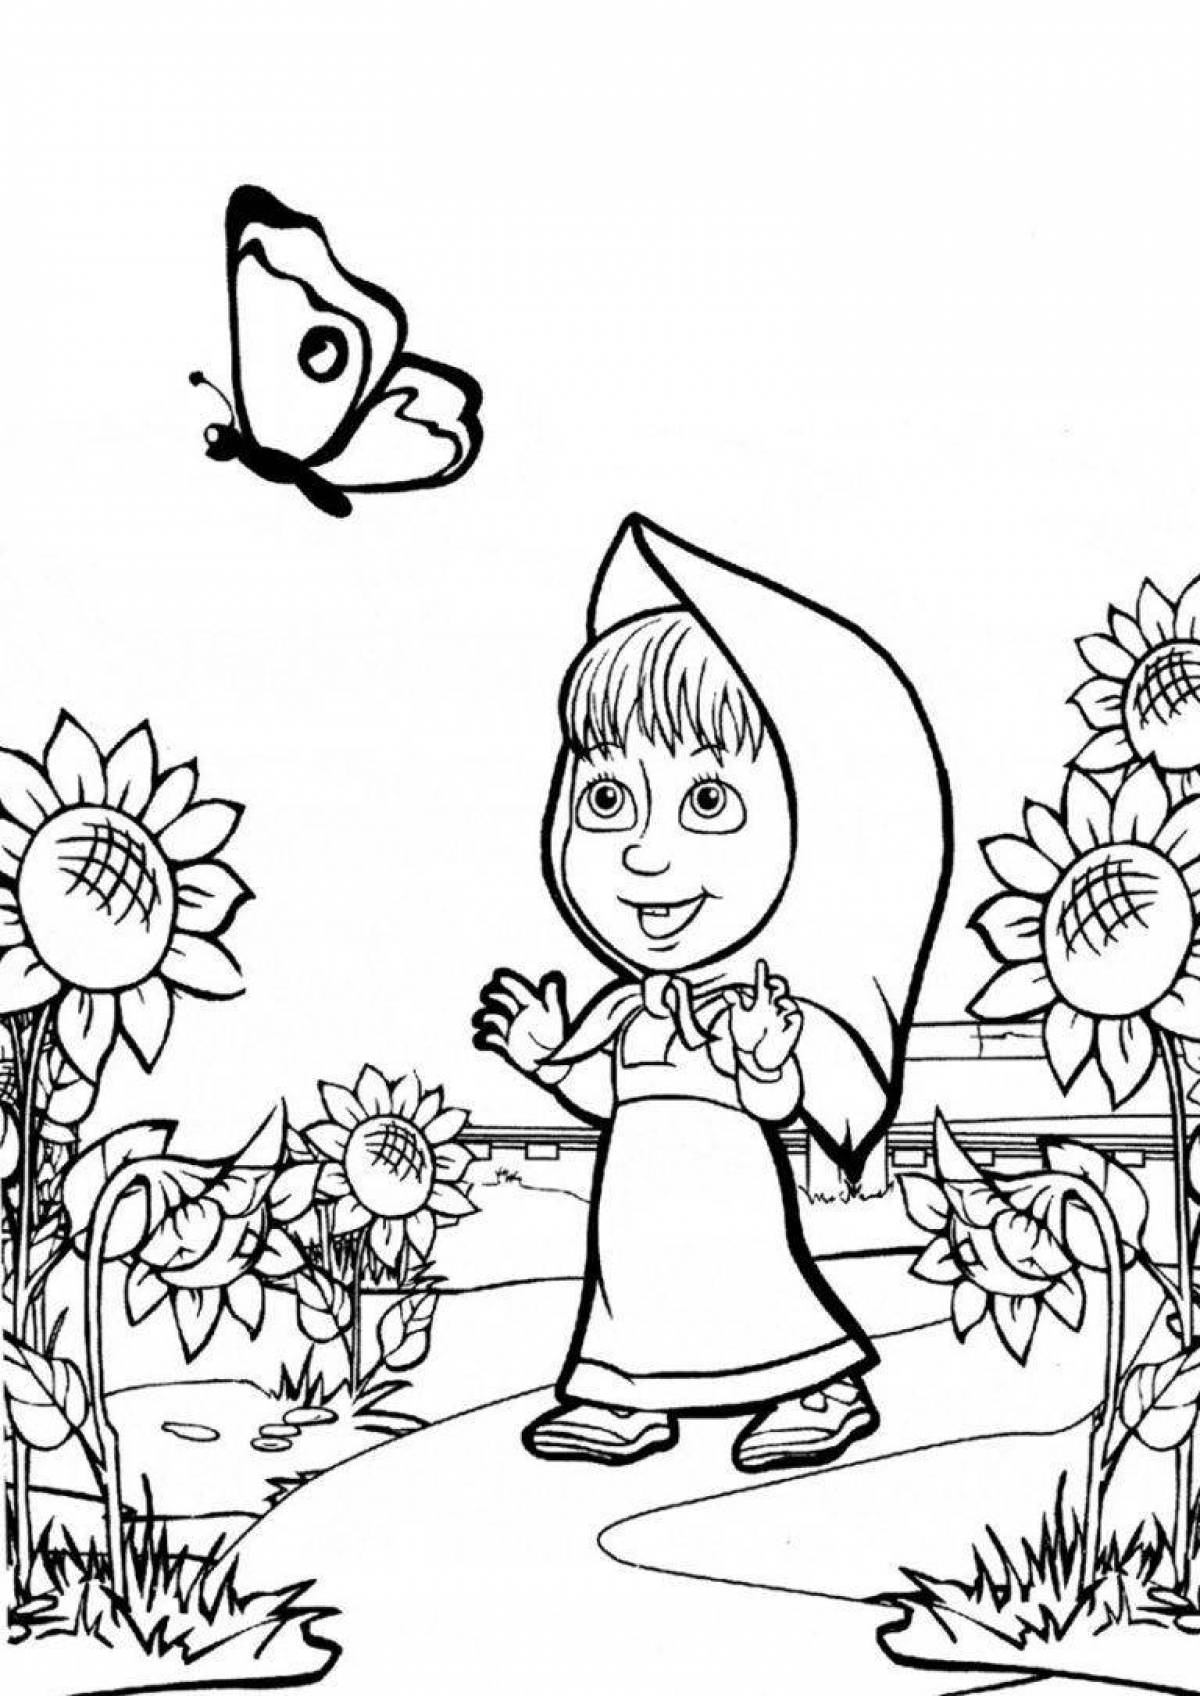 Gorgeous masha and the bear deluxe coloring book